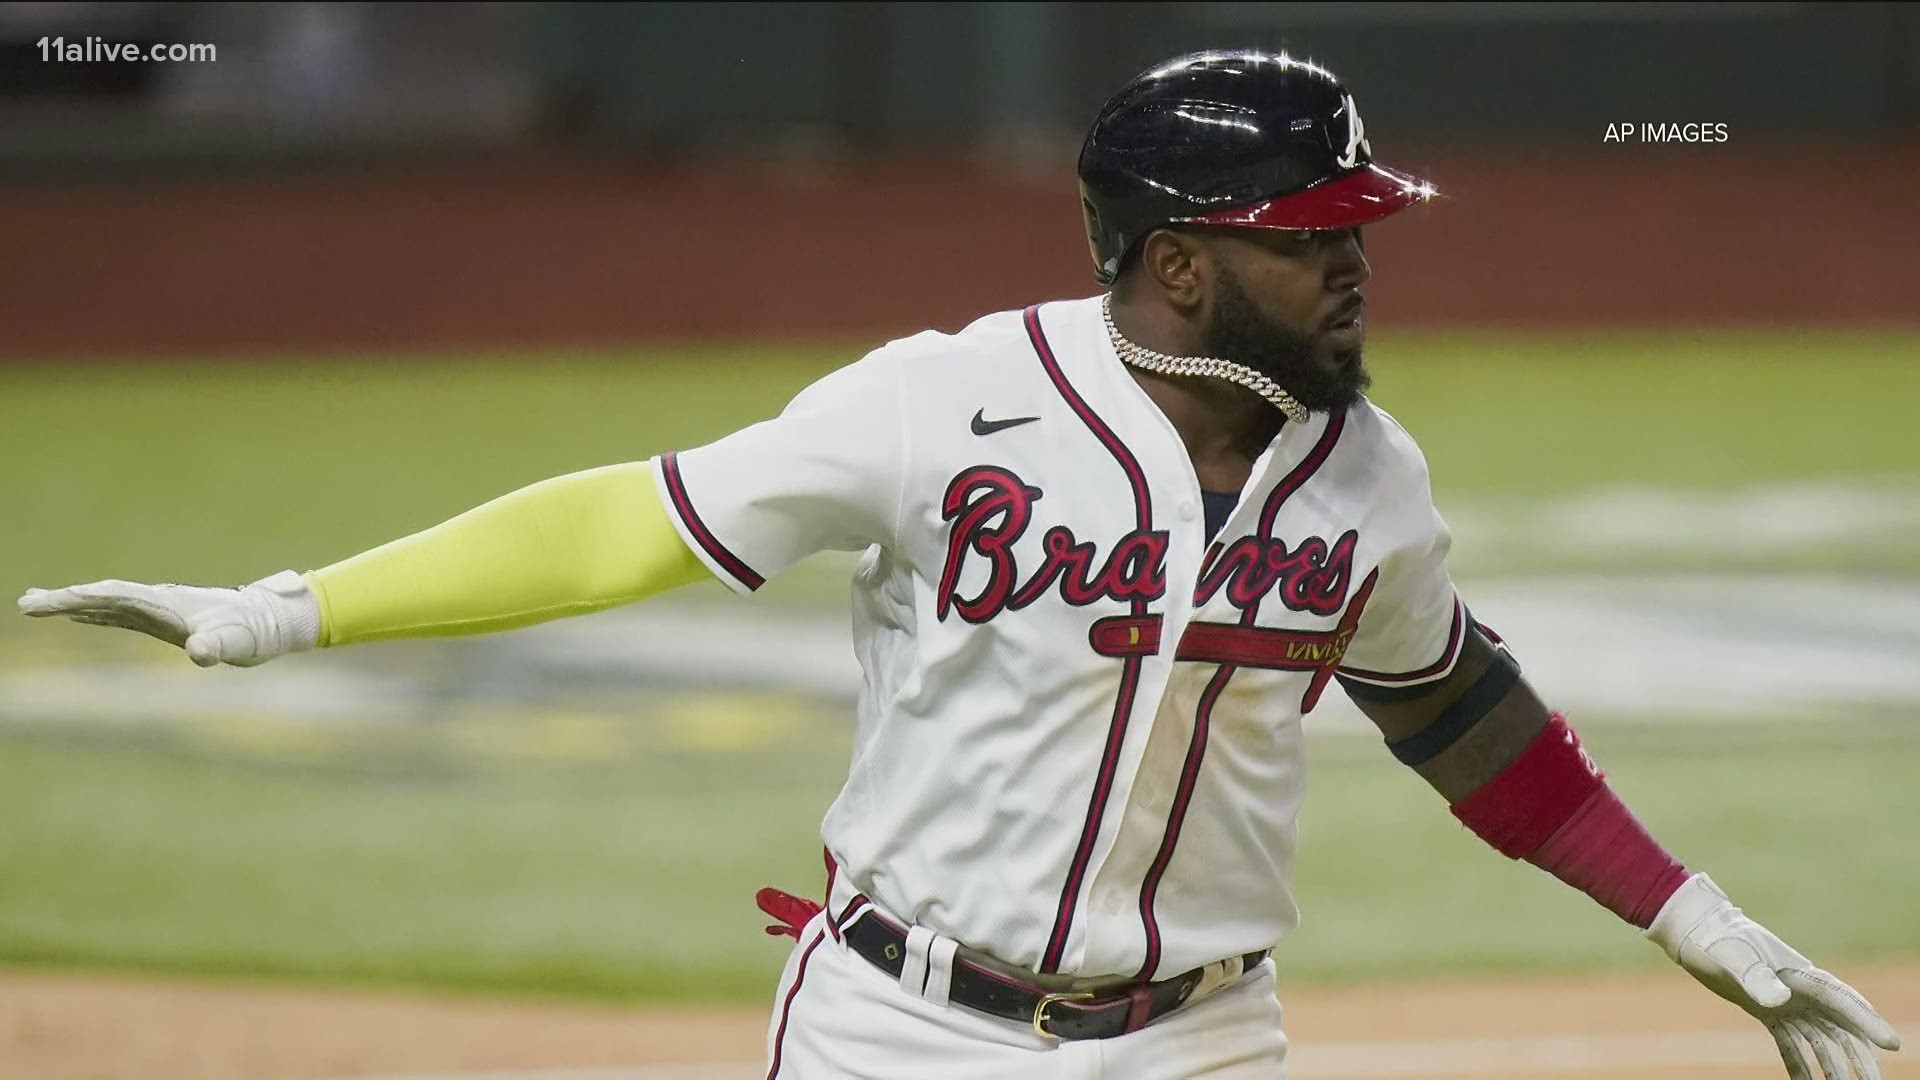 One of Atlanta's newest - and best - hitters appears to have a strong future with the Braves following a contract announcement by the ball club on Friday night.